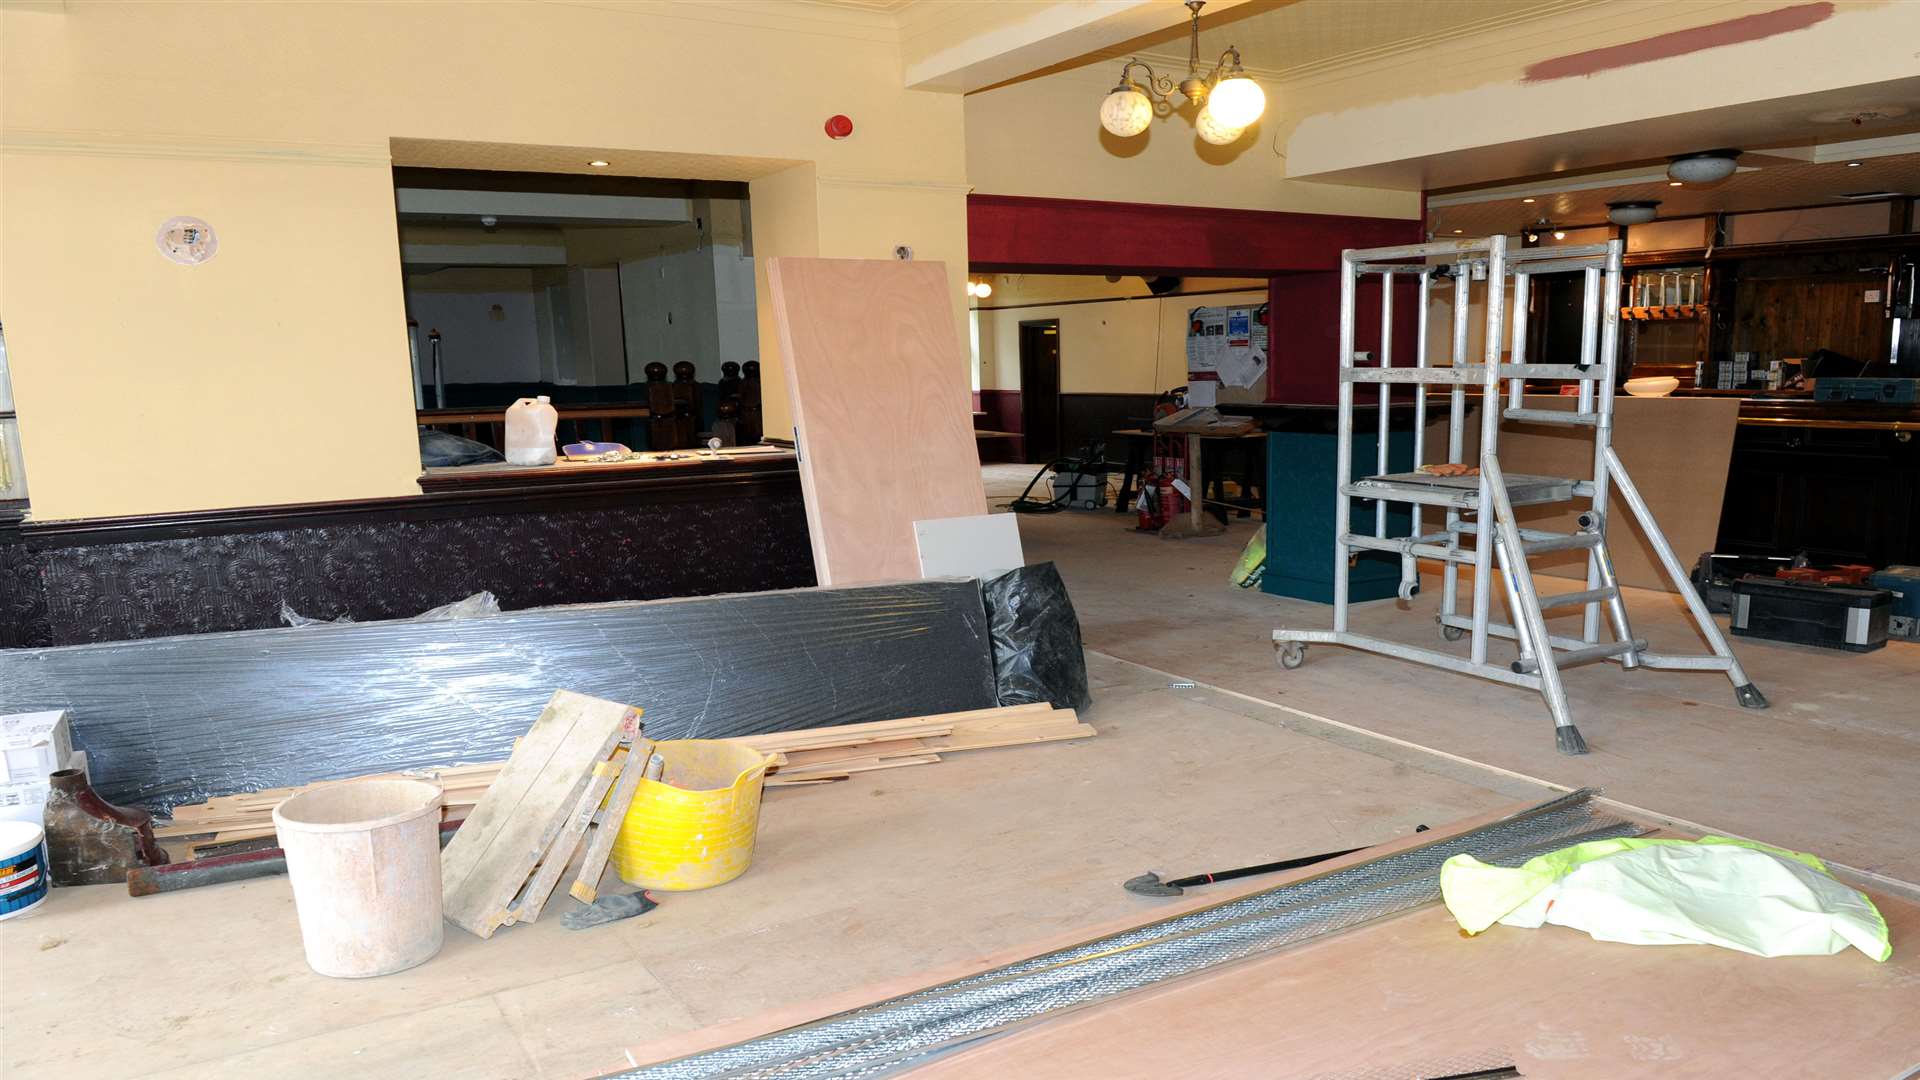 Thousands of pounds are being spent on the Ascot Arms